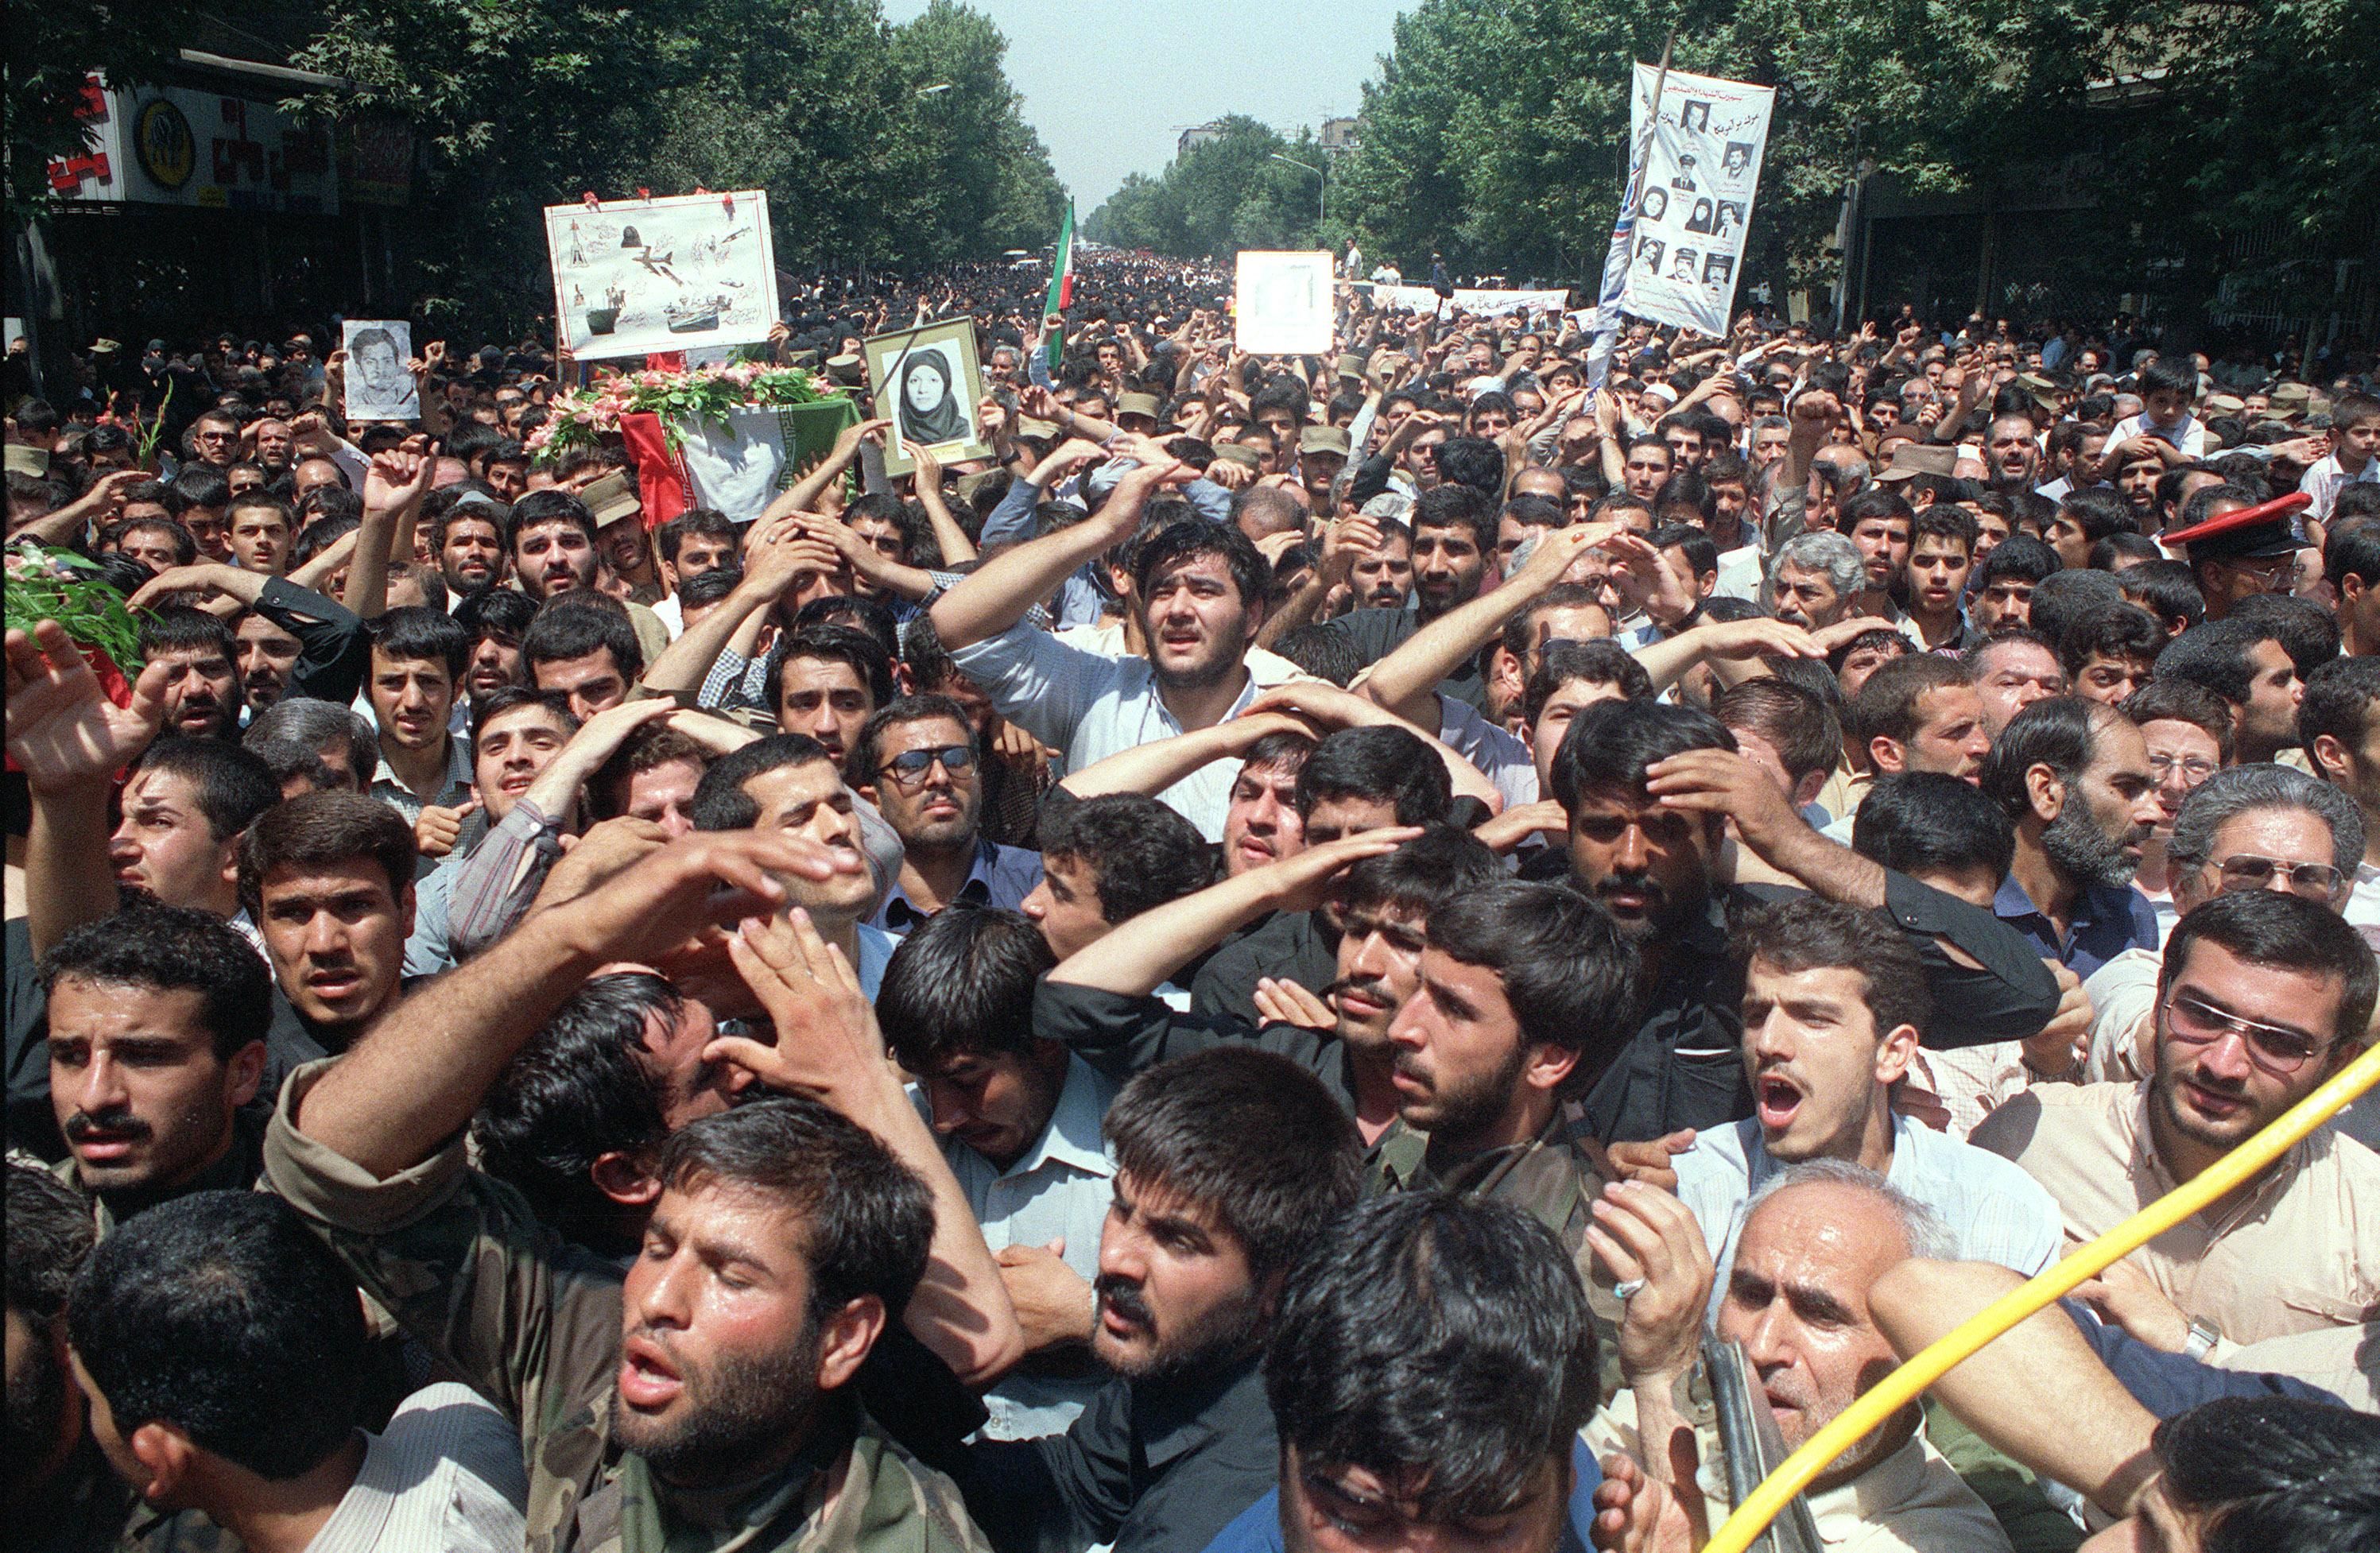 Iranian mourners attending an anti-US demonstration aftr the USS Vincennes shot down an Iranian Airbus. 290 civilian passengers and crew members, including 66 children, died. (Photo by Barry Iverson/The LIFE Images Collection via Getty Images/Getty Images)